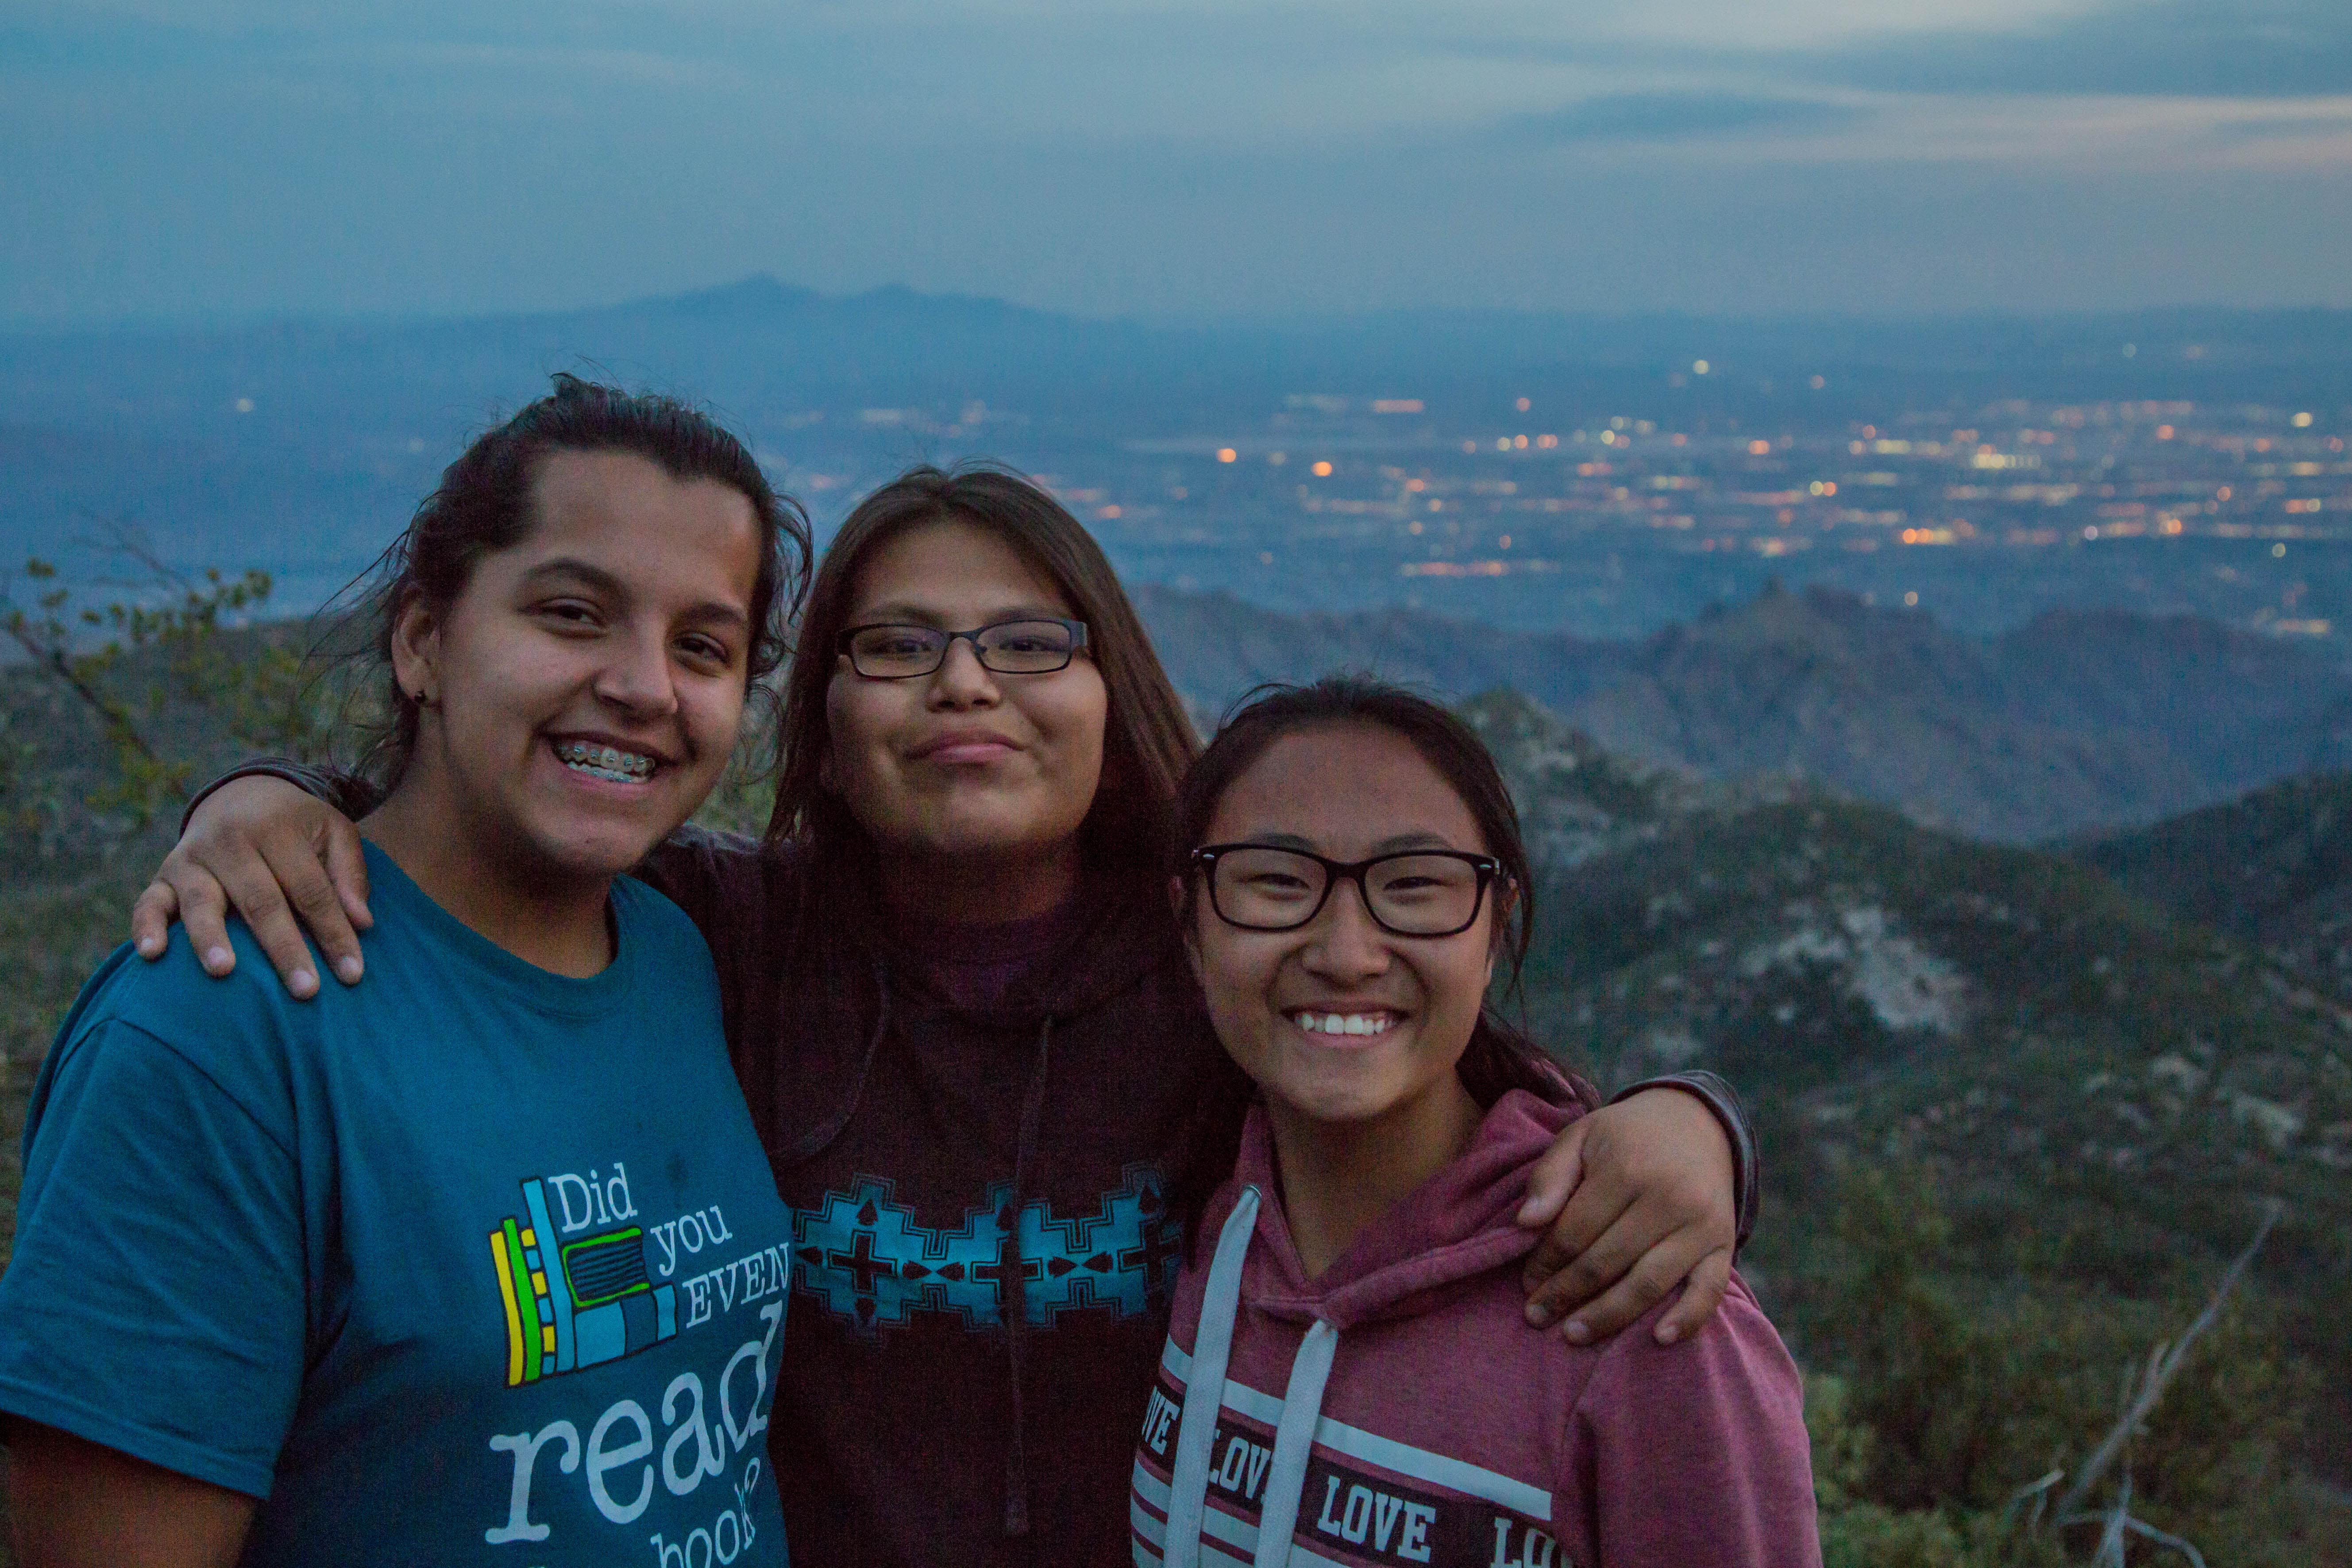 Three girls smile and pose for a photo with city lights and mountains in back